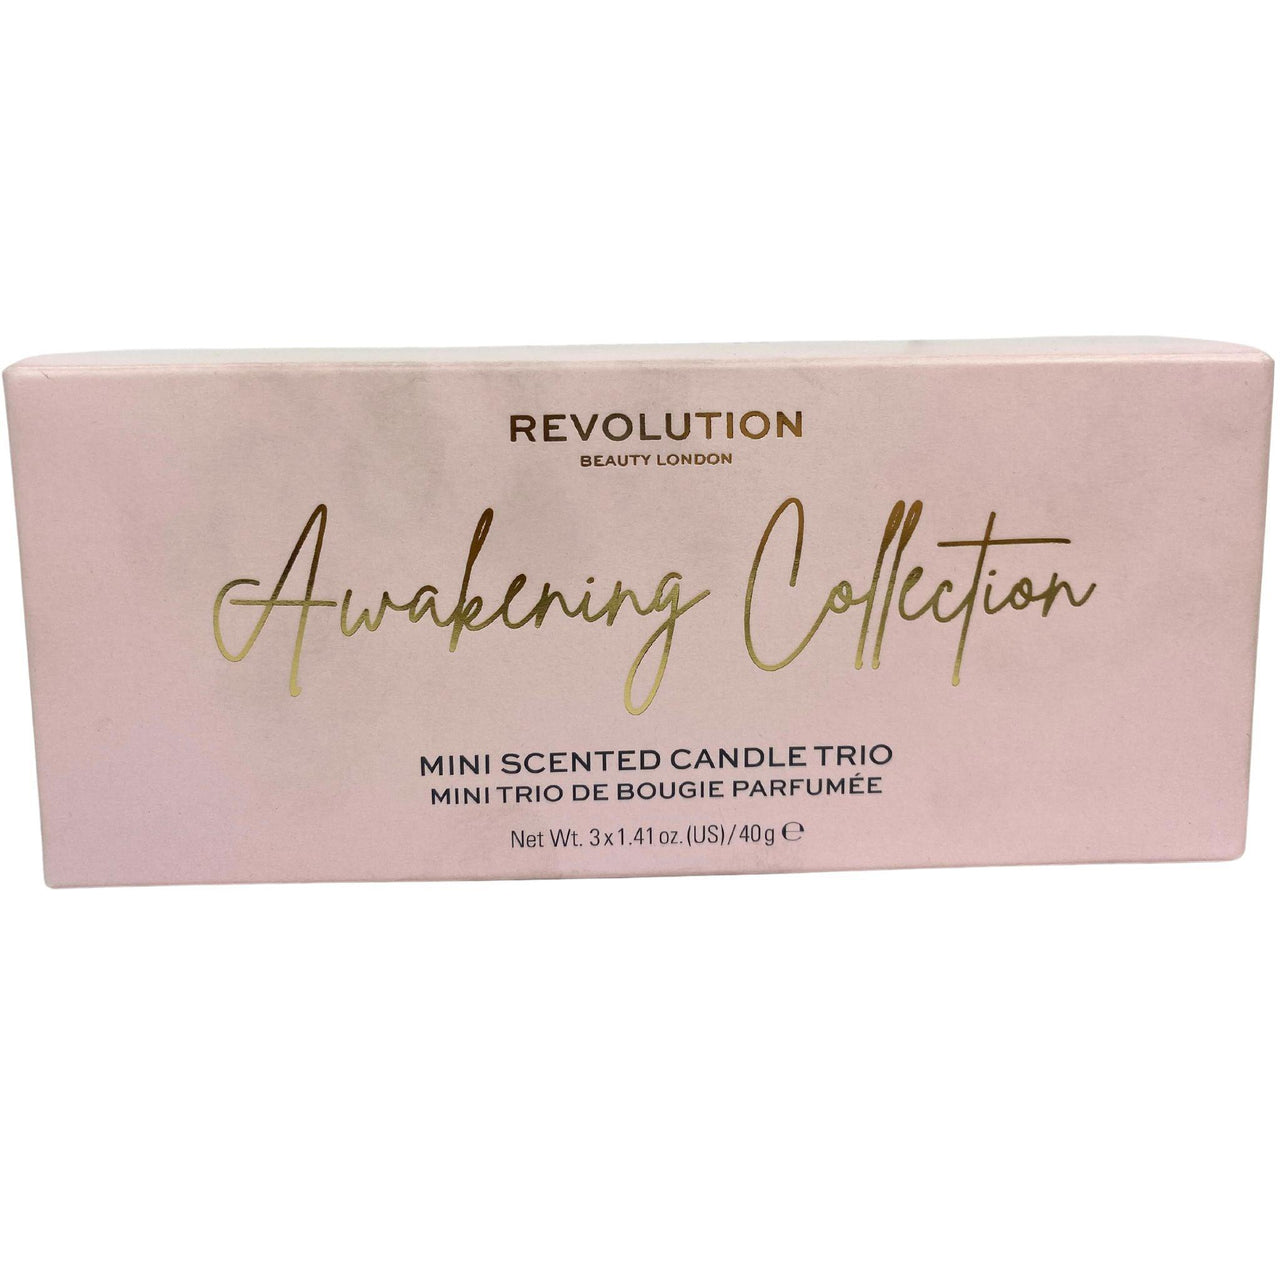 Revolution Awakening Collection Mini Scented Candle Trio (12 Pcs Lot) - Discount Wholesalers Inc